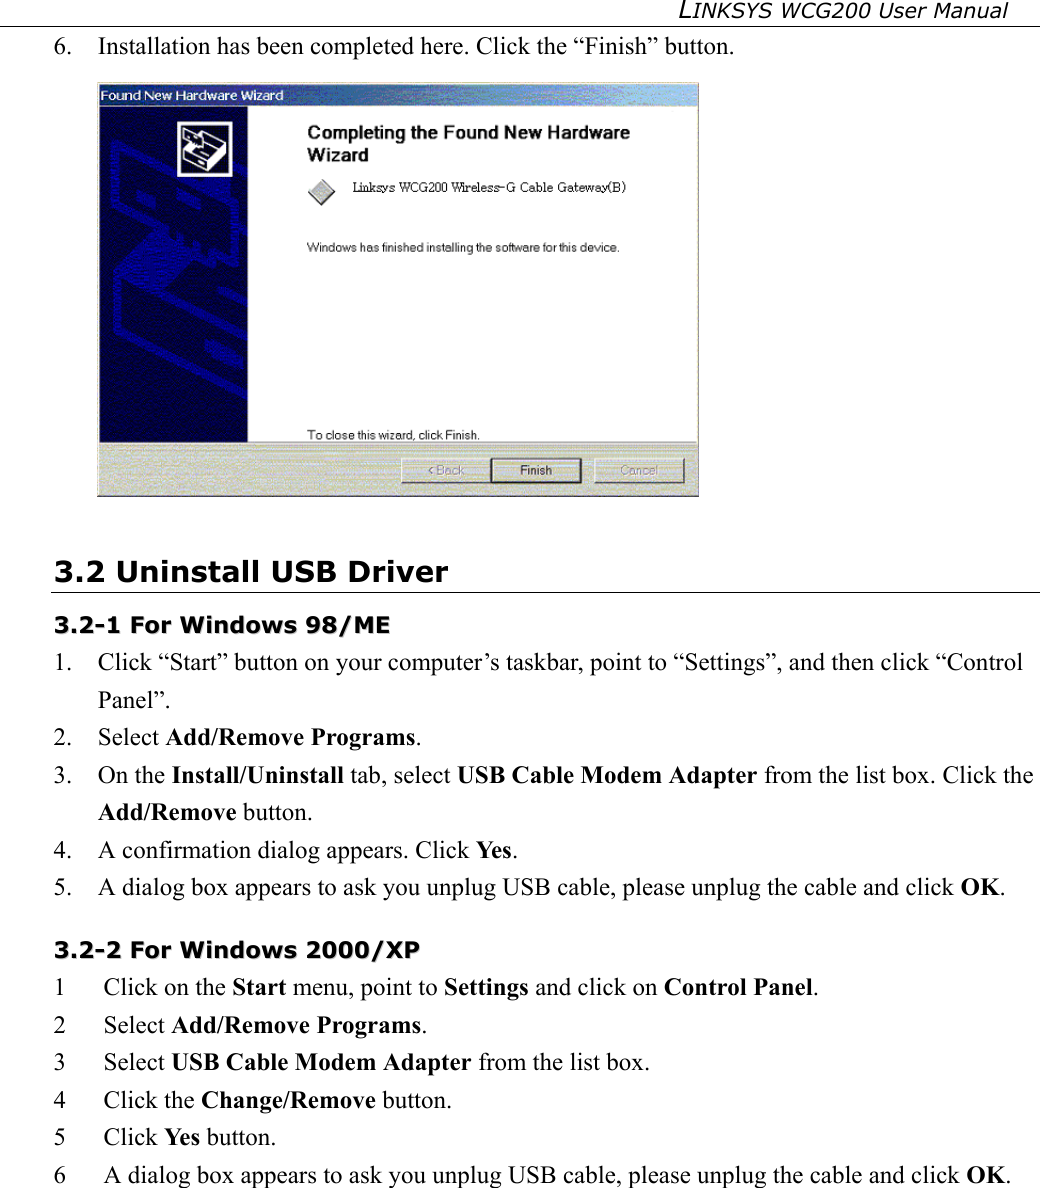 LINKSYS WCG200 User Manual   6.  Installation has been completed here. Click the “Finish” button.  3.2 Uninstall USB Driver 33..22--11  FFoorr  WWiinnddoowwss  9988//MMEE    1.  Click “Start” button on your computer’s taskbar, point to “Settings”, and then click “Control Panel”. 2. Select Add/Remove Programs. 3. On the Install/Uninstall tab, select USB Cable Modem Adapter from the list box. Click the Add/Remove button. 4.  A confirmation dialog appears. Click Ye s . 5.  A dialog box appears to ask you unplug USB cable, please unplug the cable and click OK. 33..22--22  FFoorr  WWiinnddoowwss  22000000//XXPP  1  Click on the Start menu, point to Settings and click on Control Panel. 2 Select Add/Remove Programs. 3 Select USB Cable Modem Adapter from the list box. 4 Click the Change/Remove button. 5 Click Ye s  button. 6  A dialog box appears to ask you unplug USB cable, please unplug the cable and click OK.  